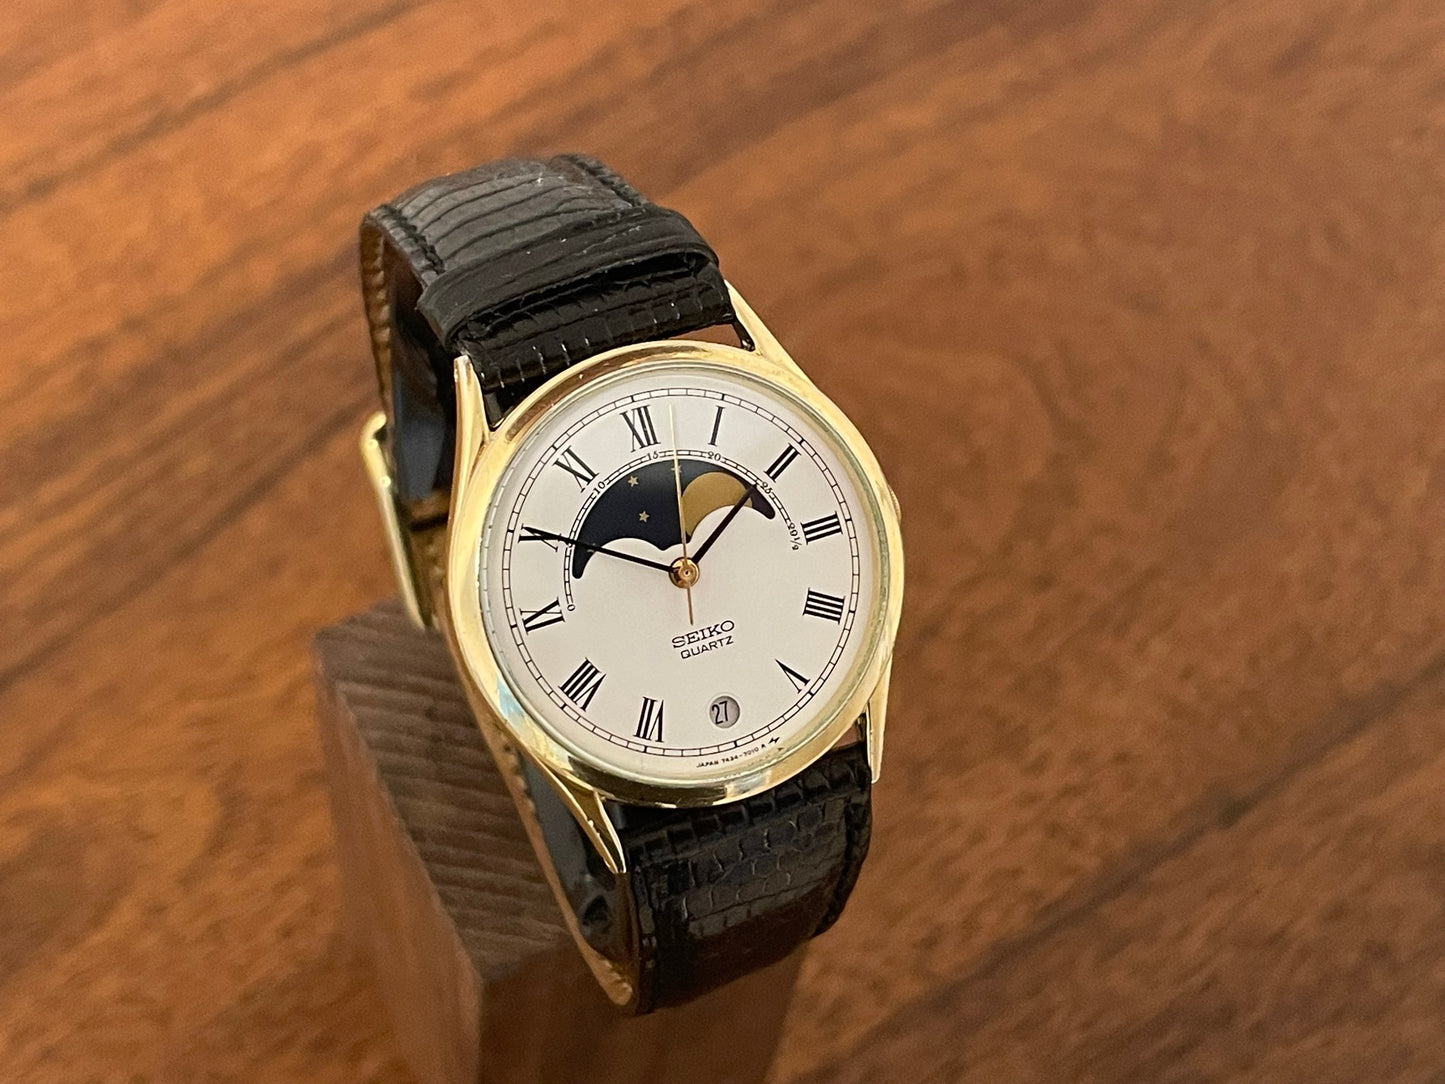 (1984) Seiko 7434-7000 dress watch with moon phase